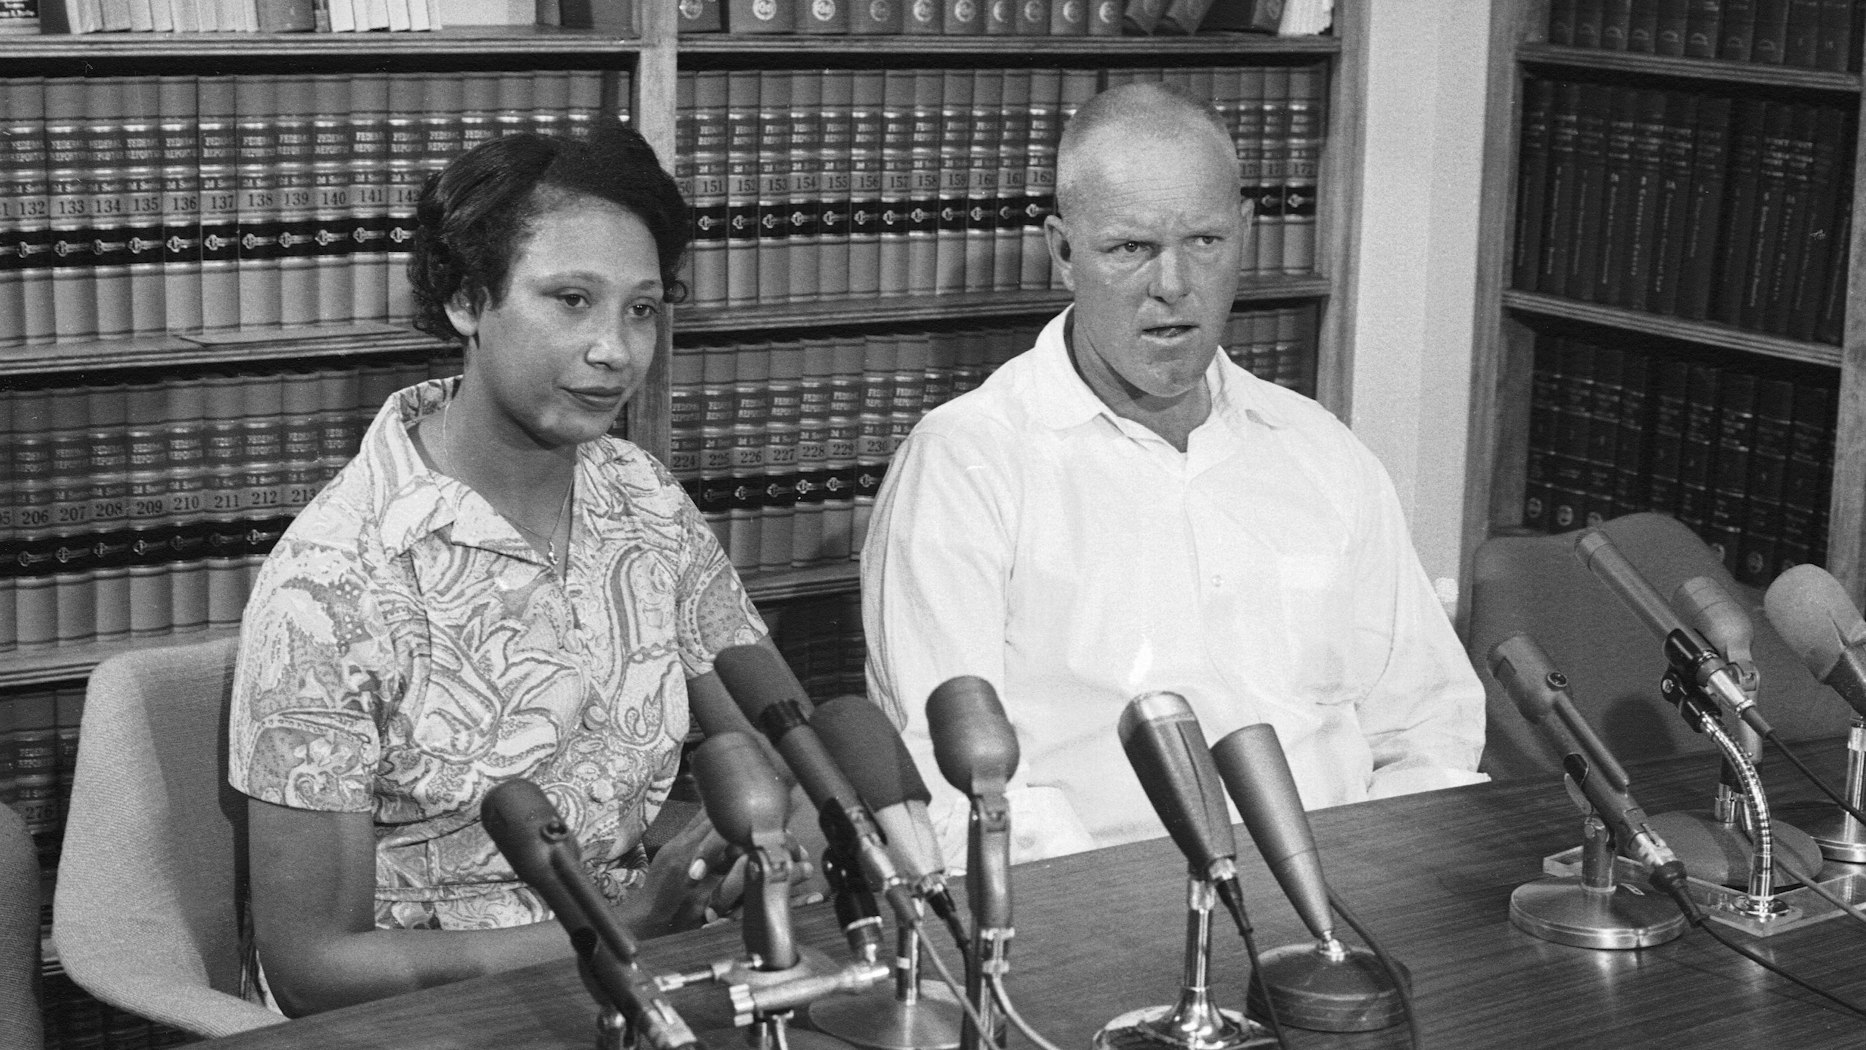 Fifty Years After ‘loving V Virginia Celebrating The Beauty Of Interracial Marriage